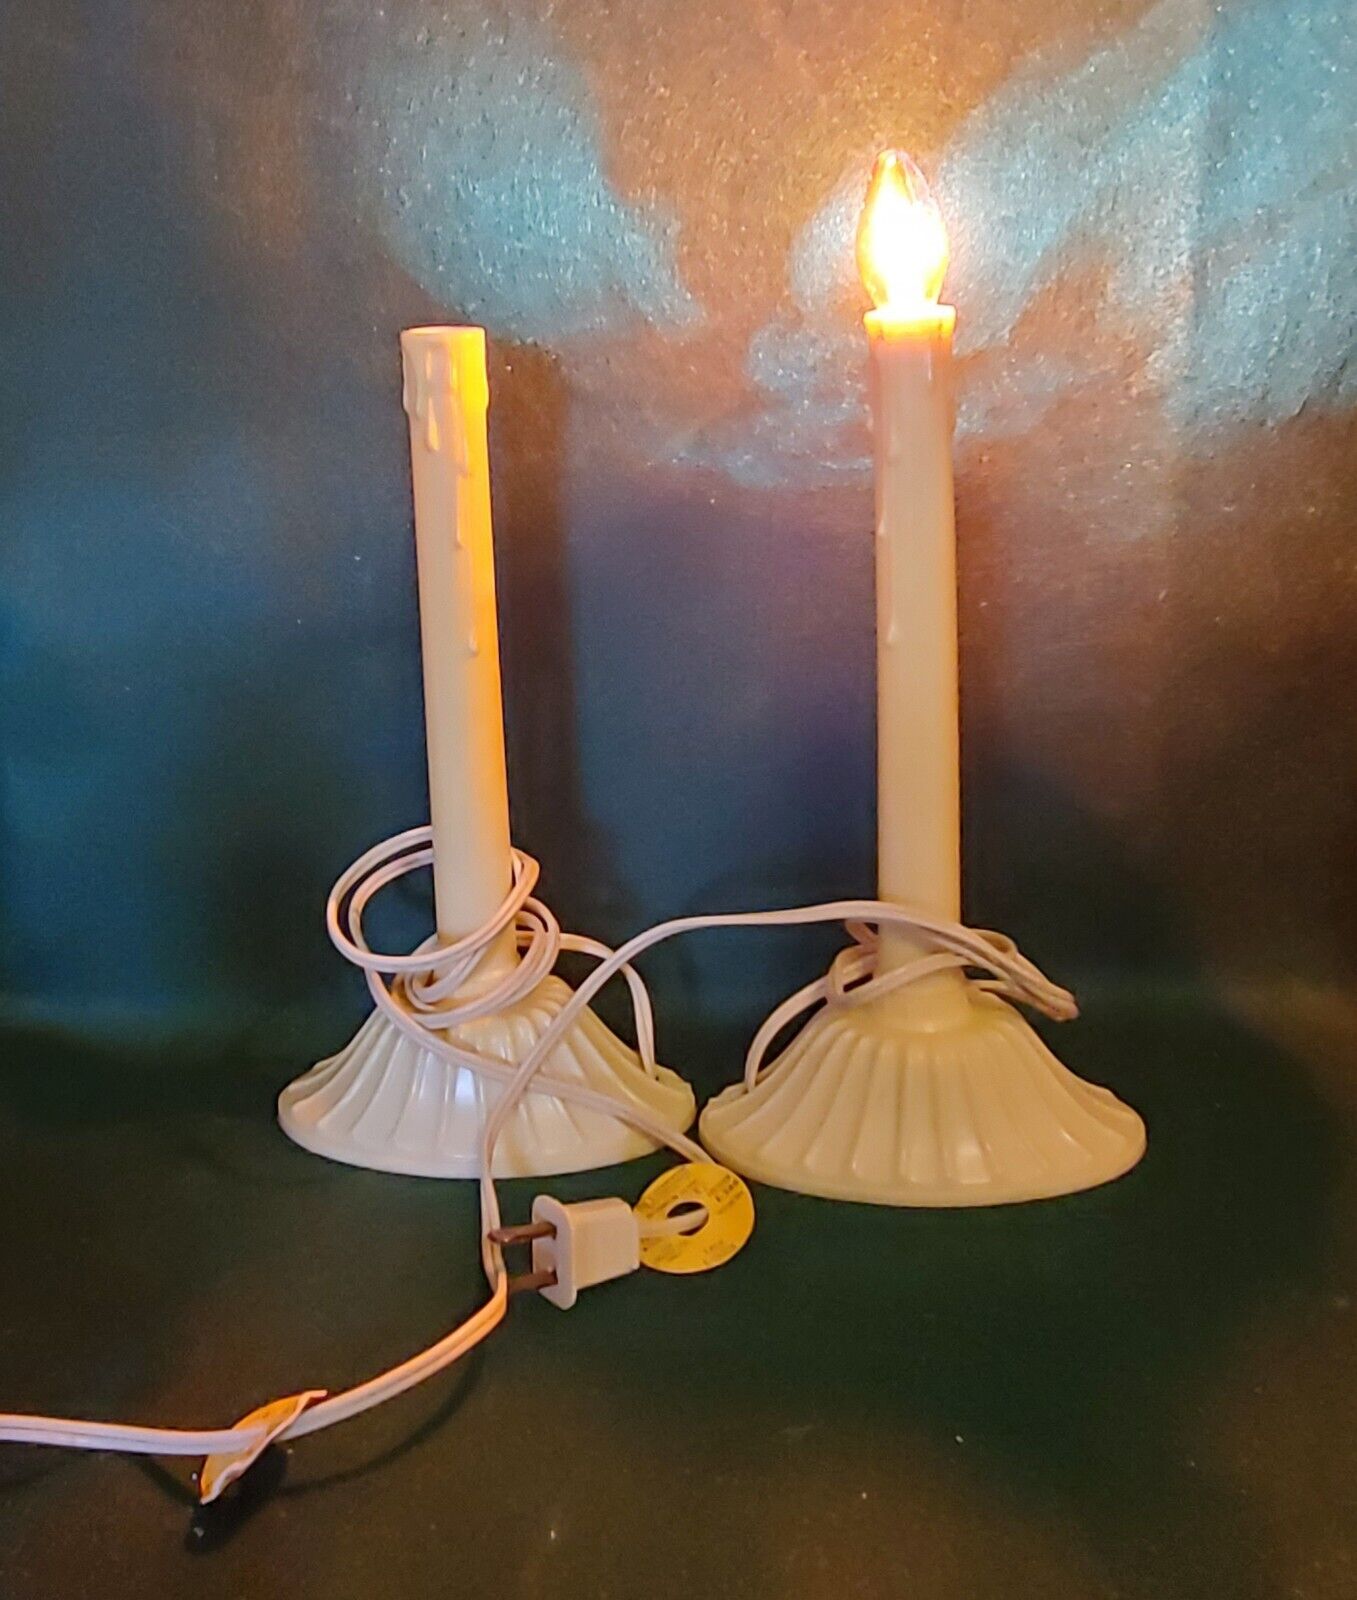 Vintage Christmas 1960s 1970s Electric Window Candle Lights Decoration lot of 2